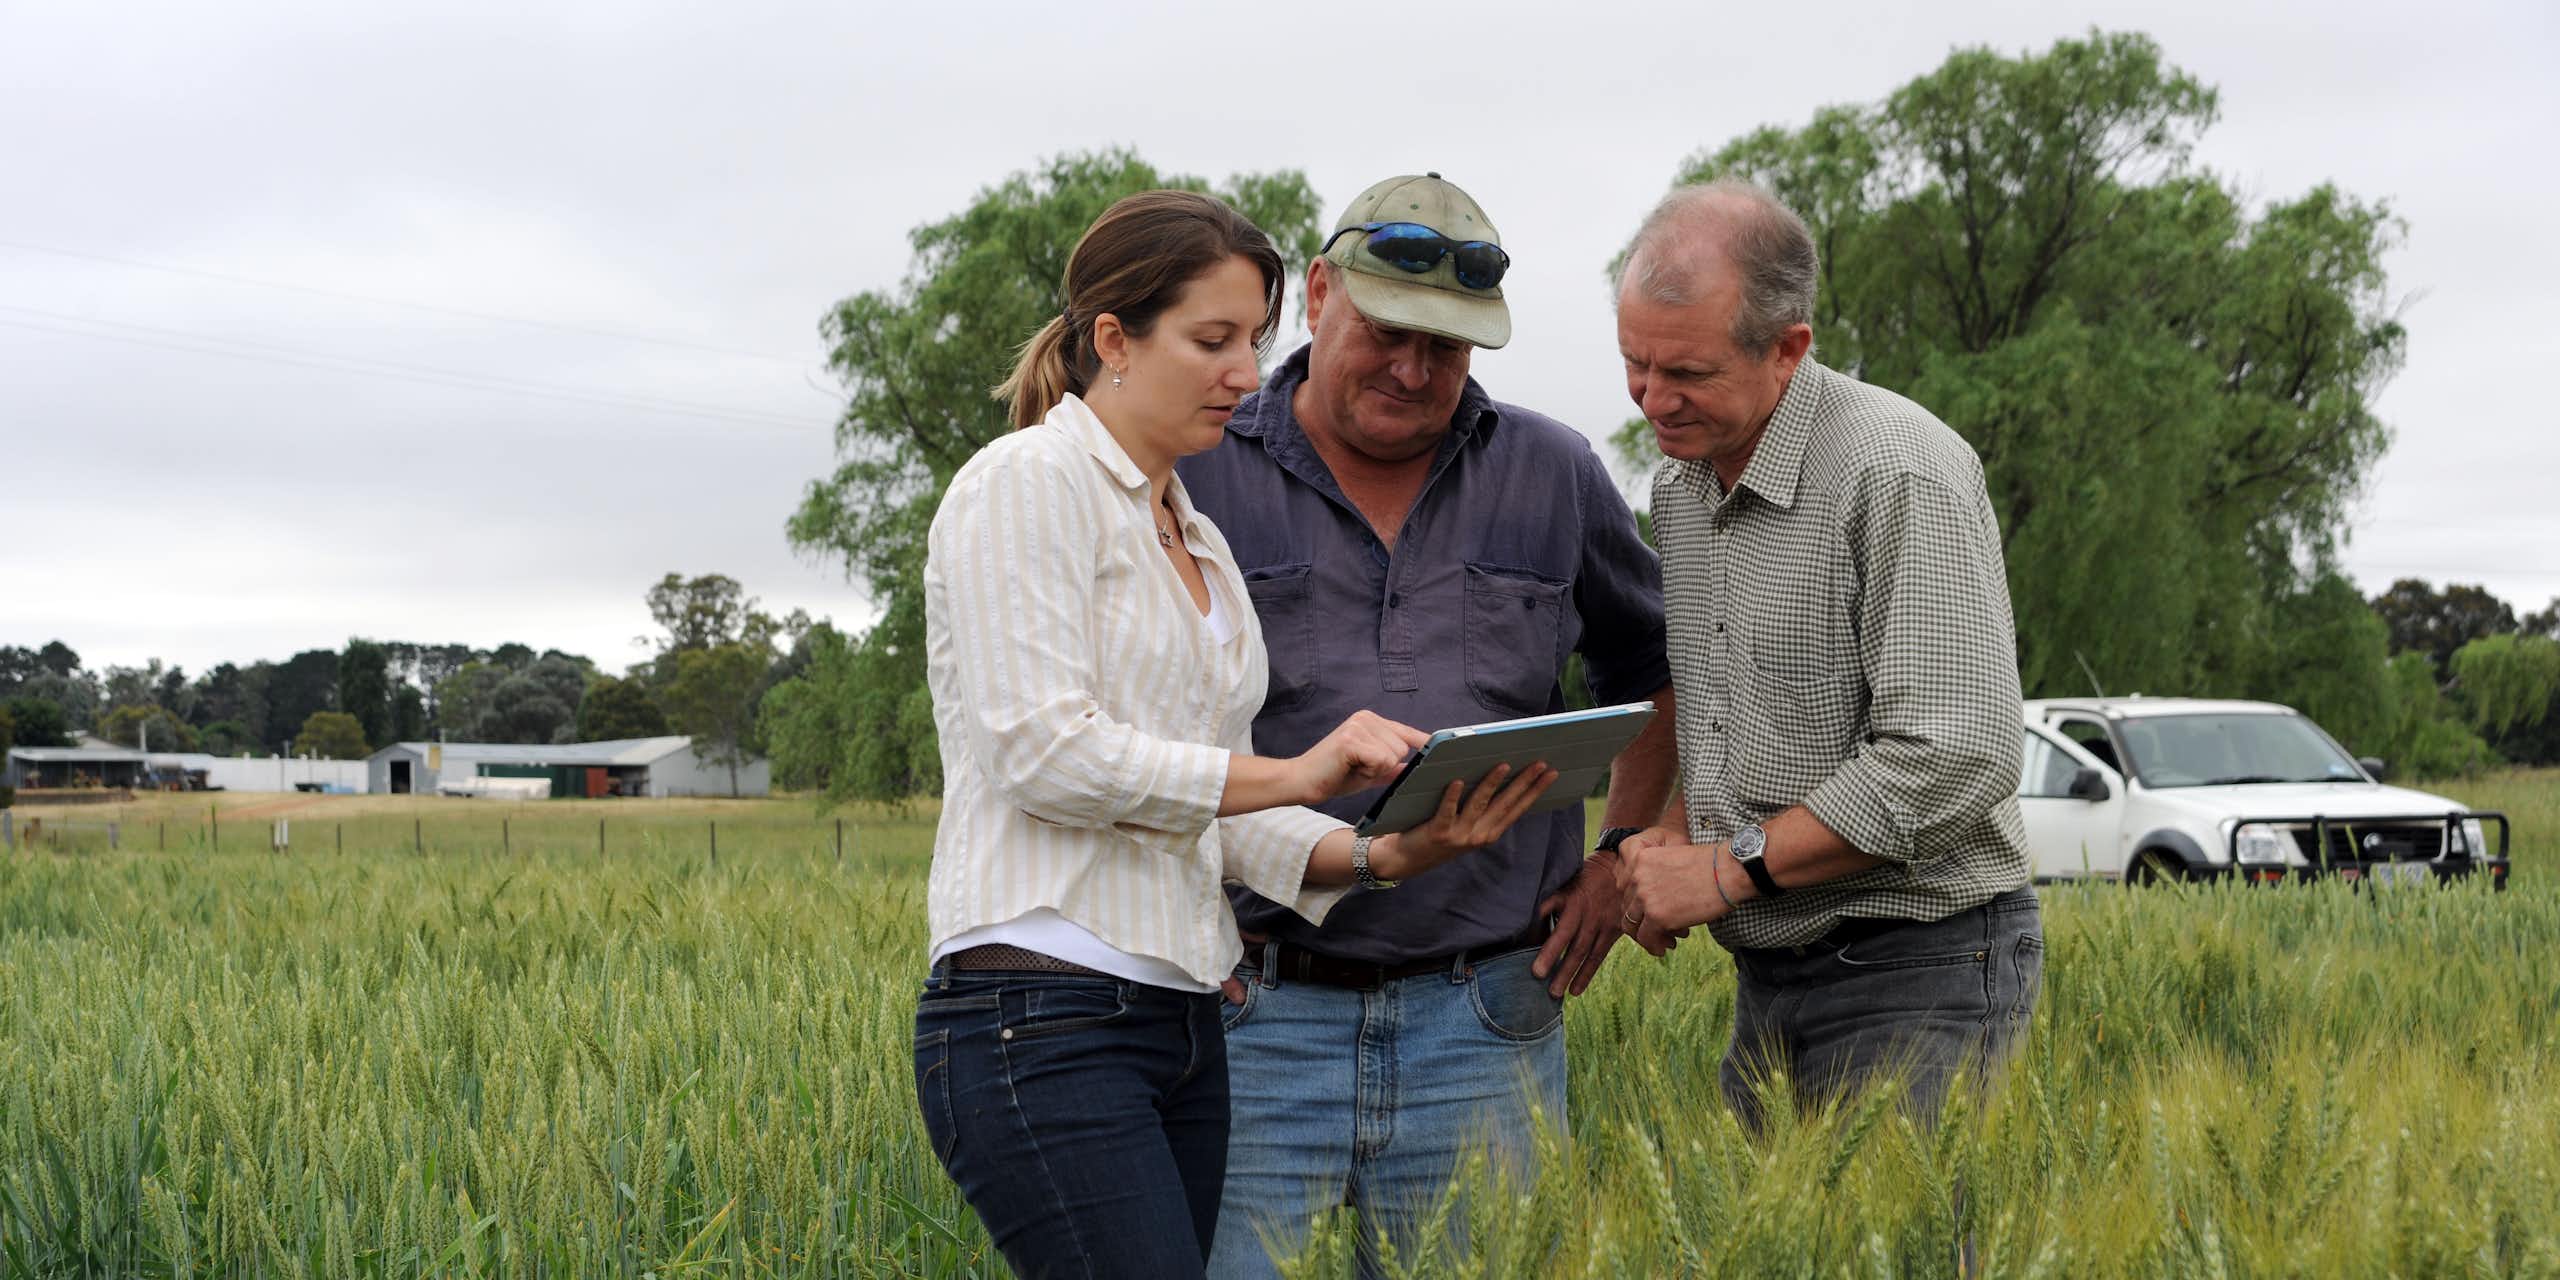 Three people gather around an iPad or table in a field, with farm vehicles in the background